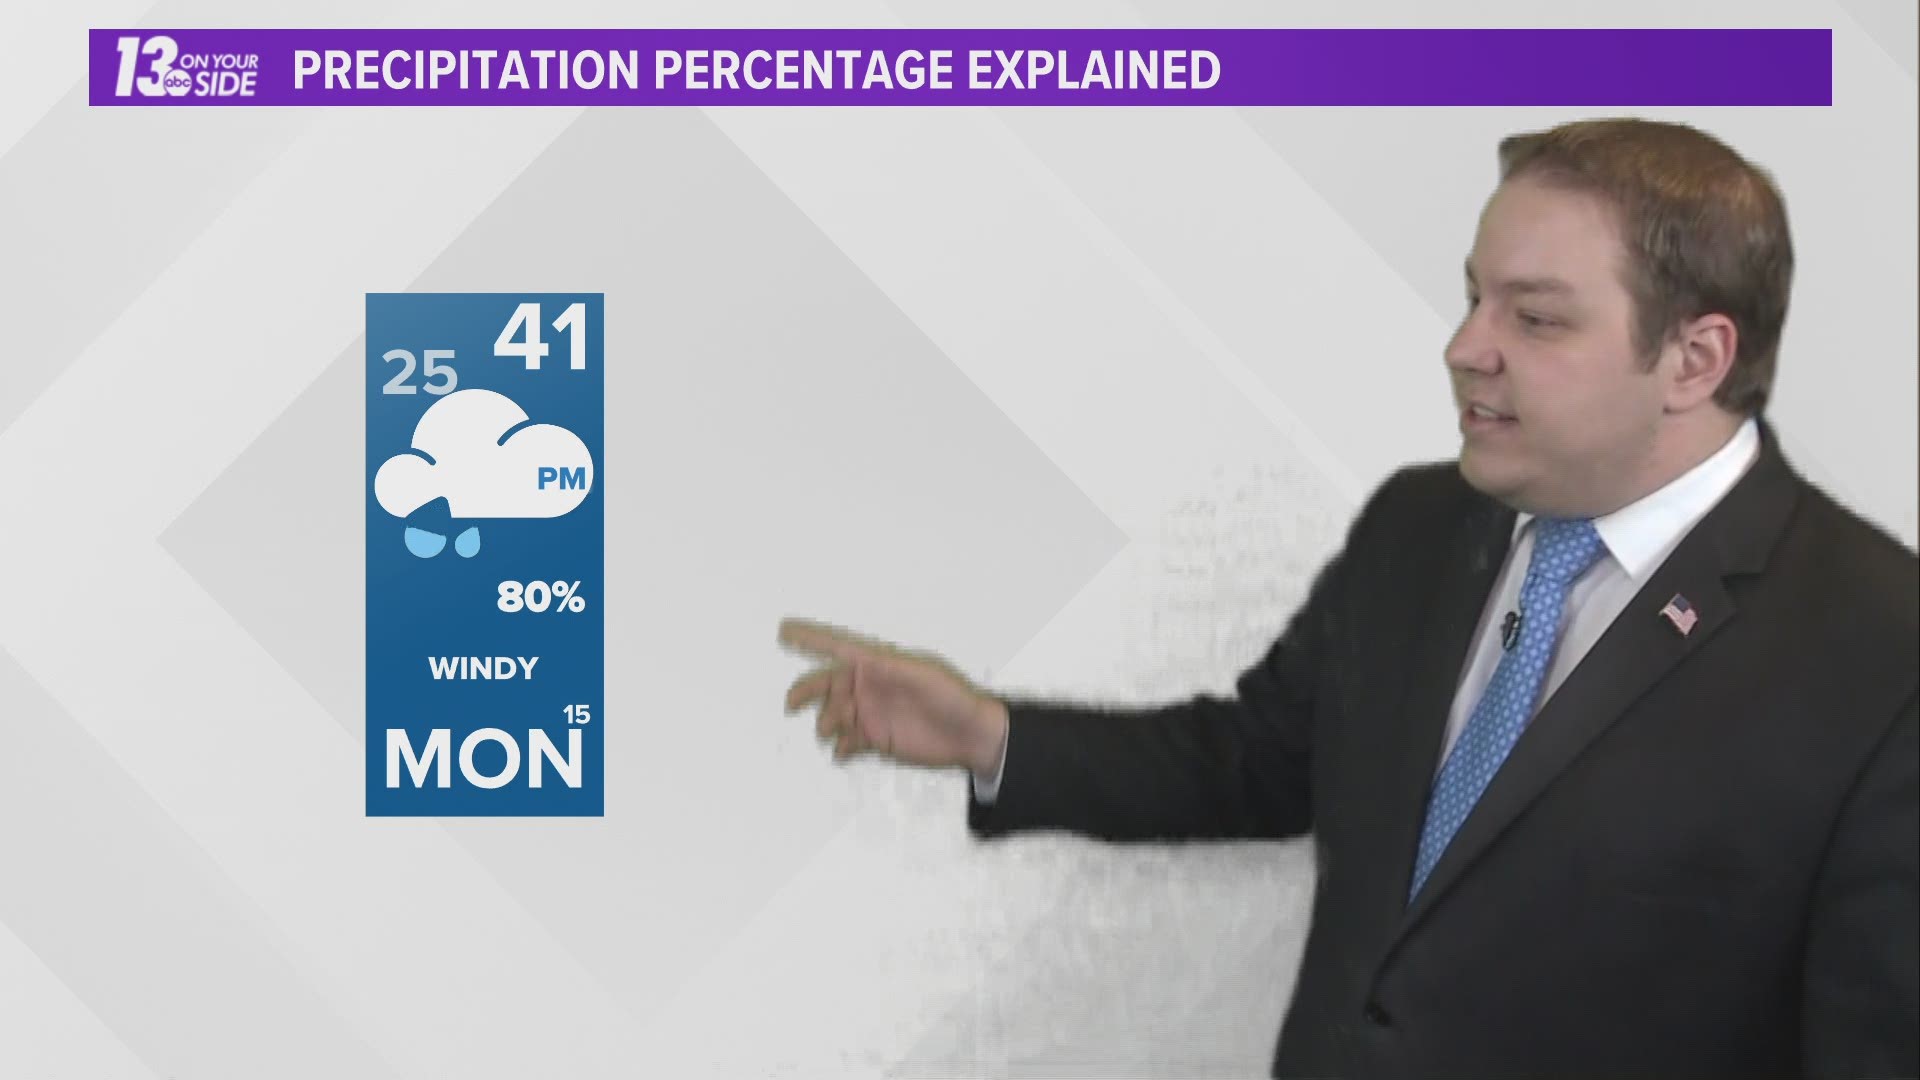 Do you know what 60% in your 13 OYS forecast actually means with regard to rain or snow? Meteorologist Michael Behrens explains!